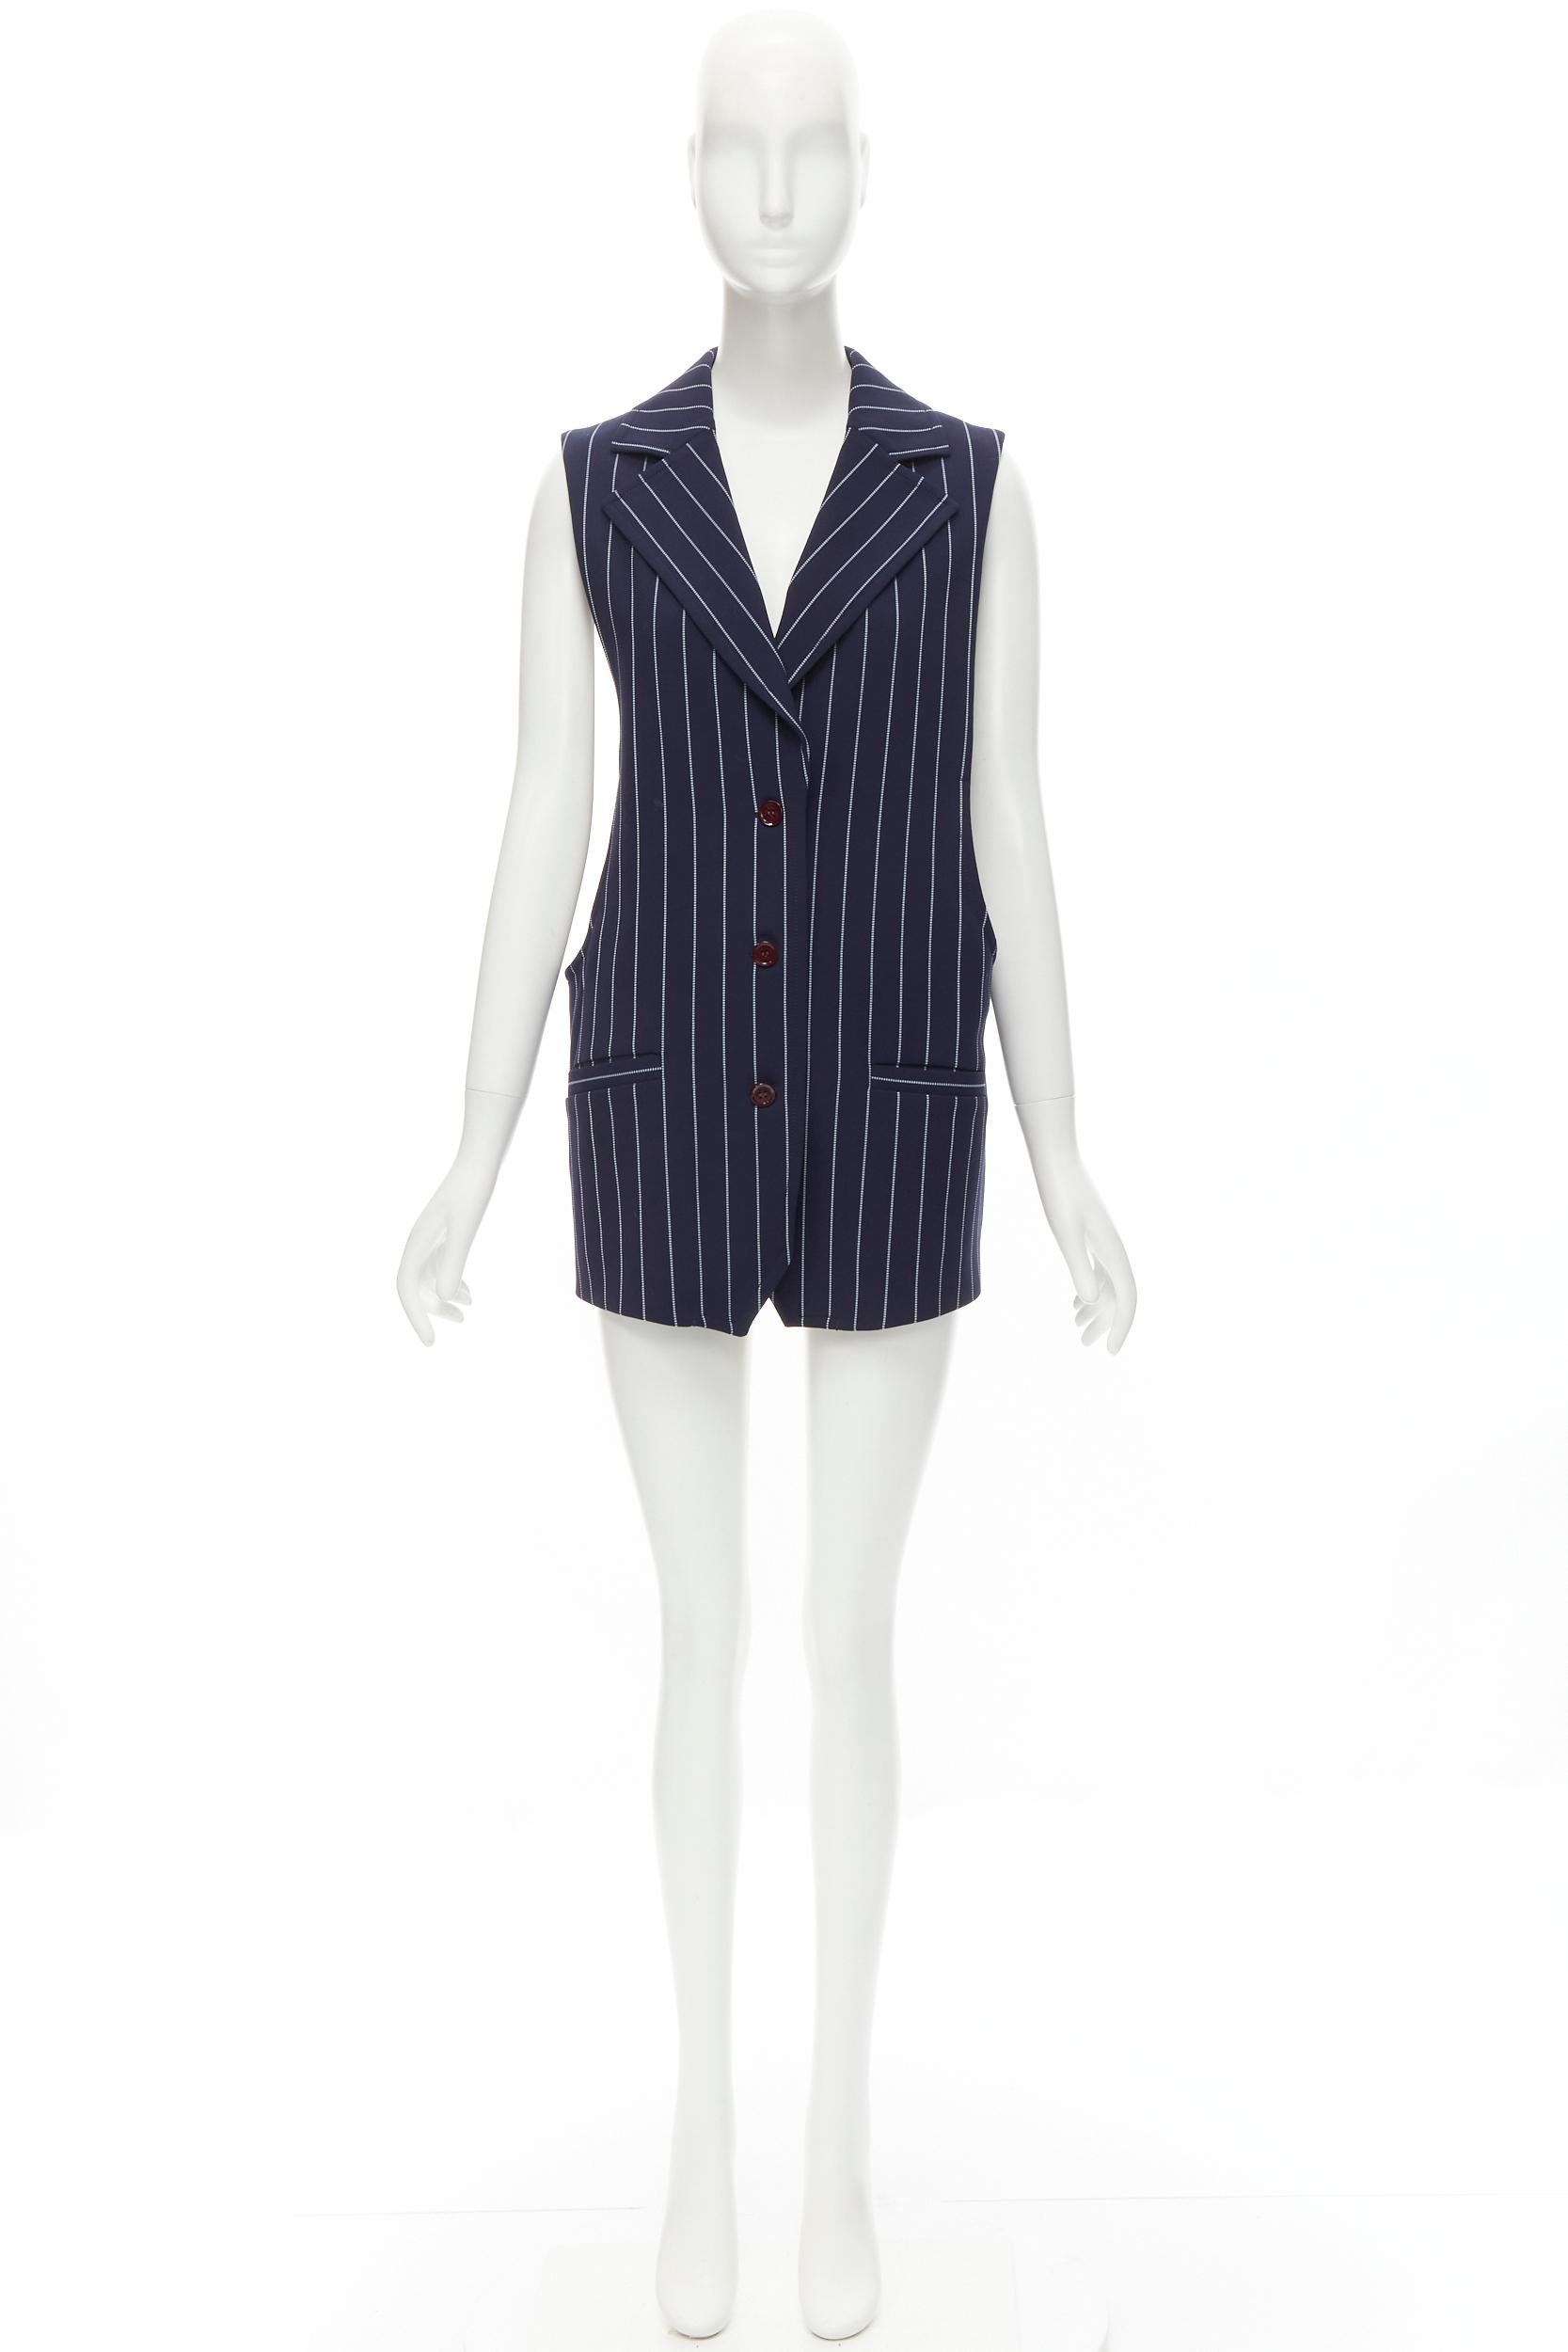 SEE. BY CHLOE blue white striped dropped armhole boxy vest FR36 S For Sale 2